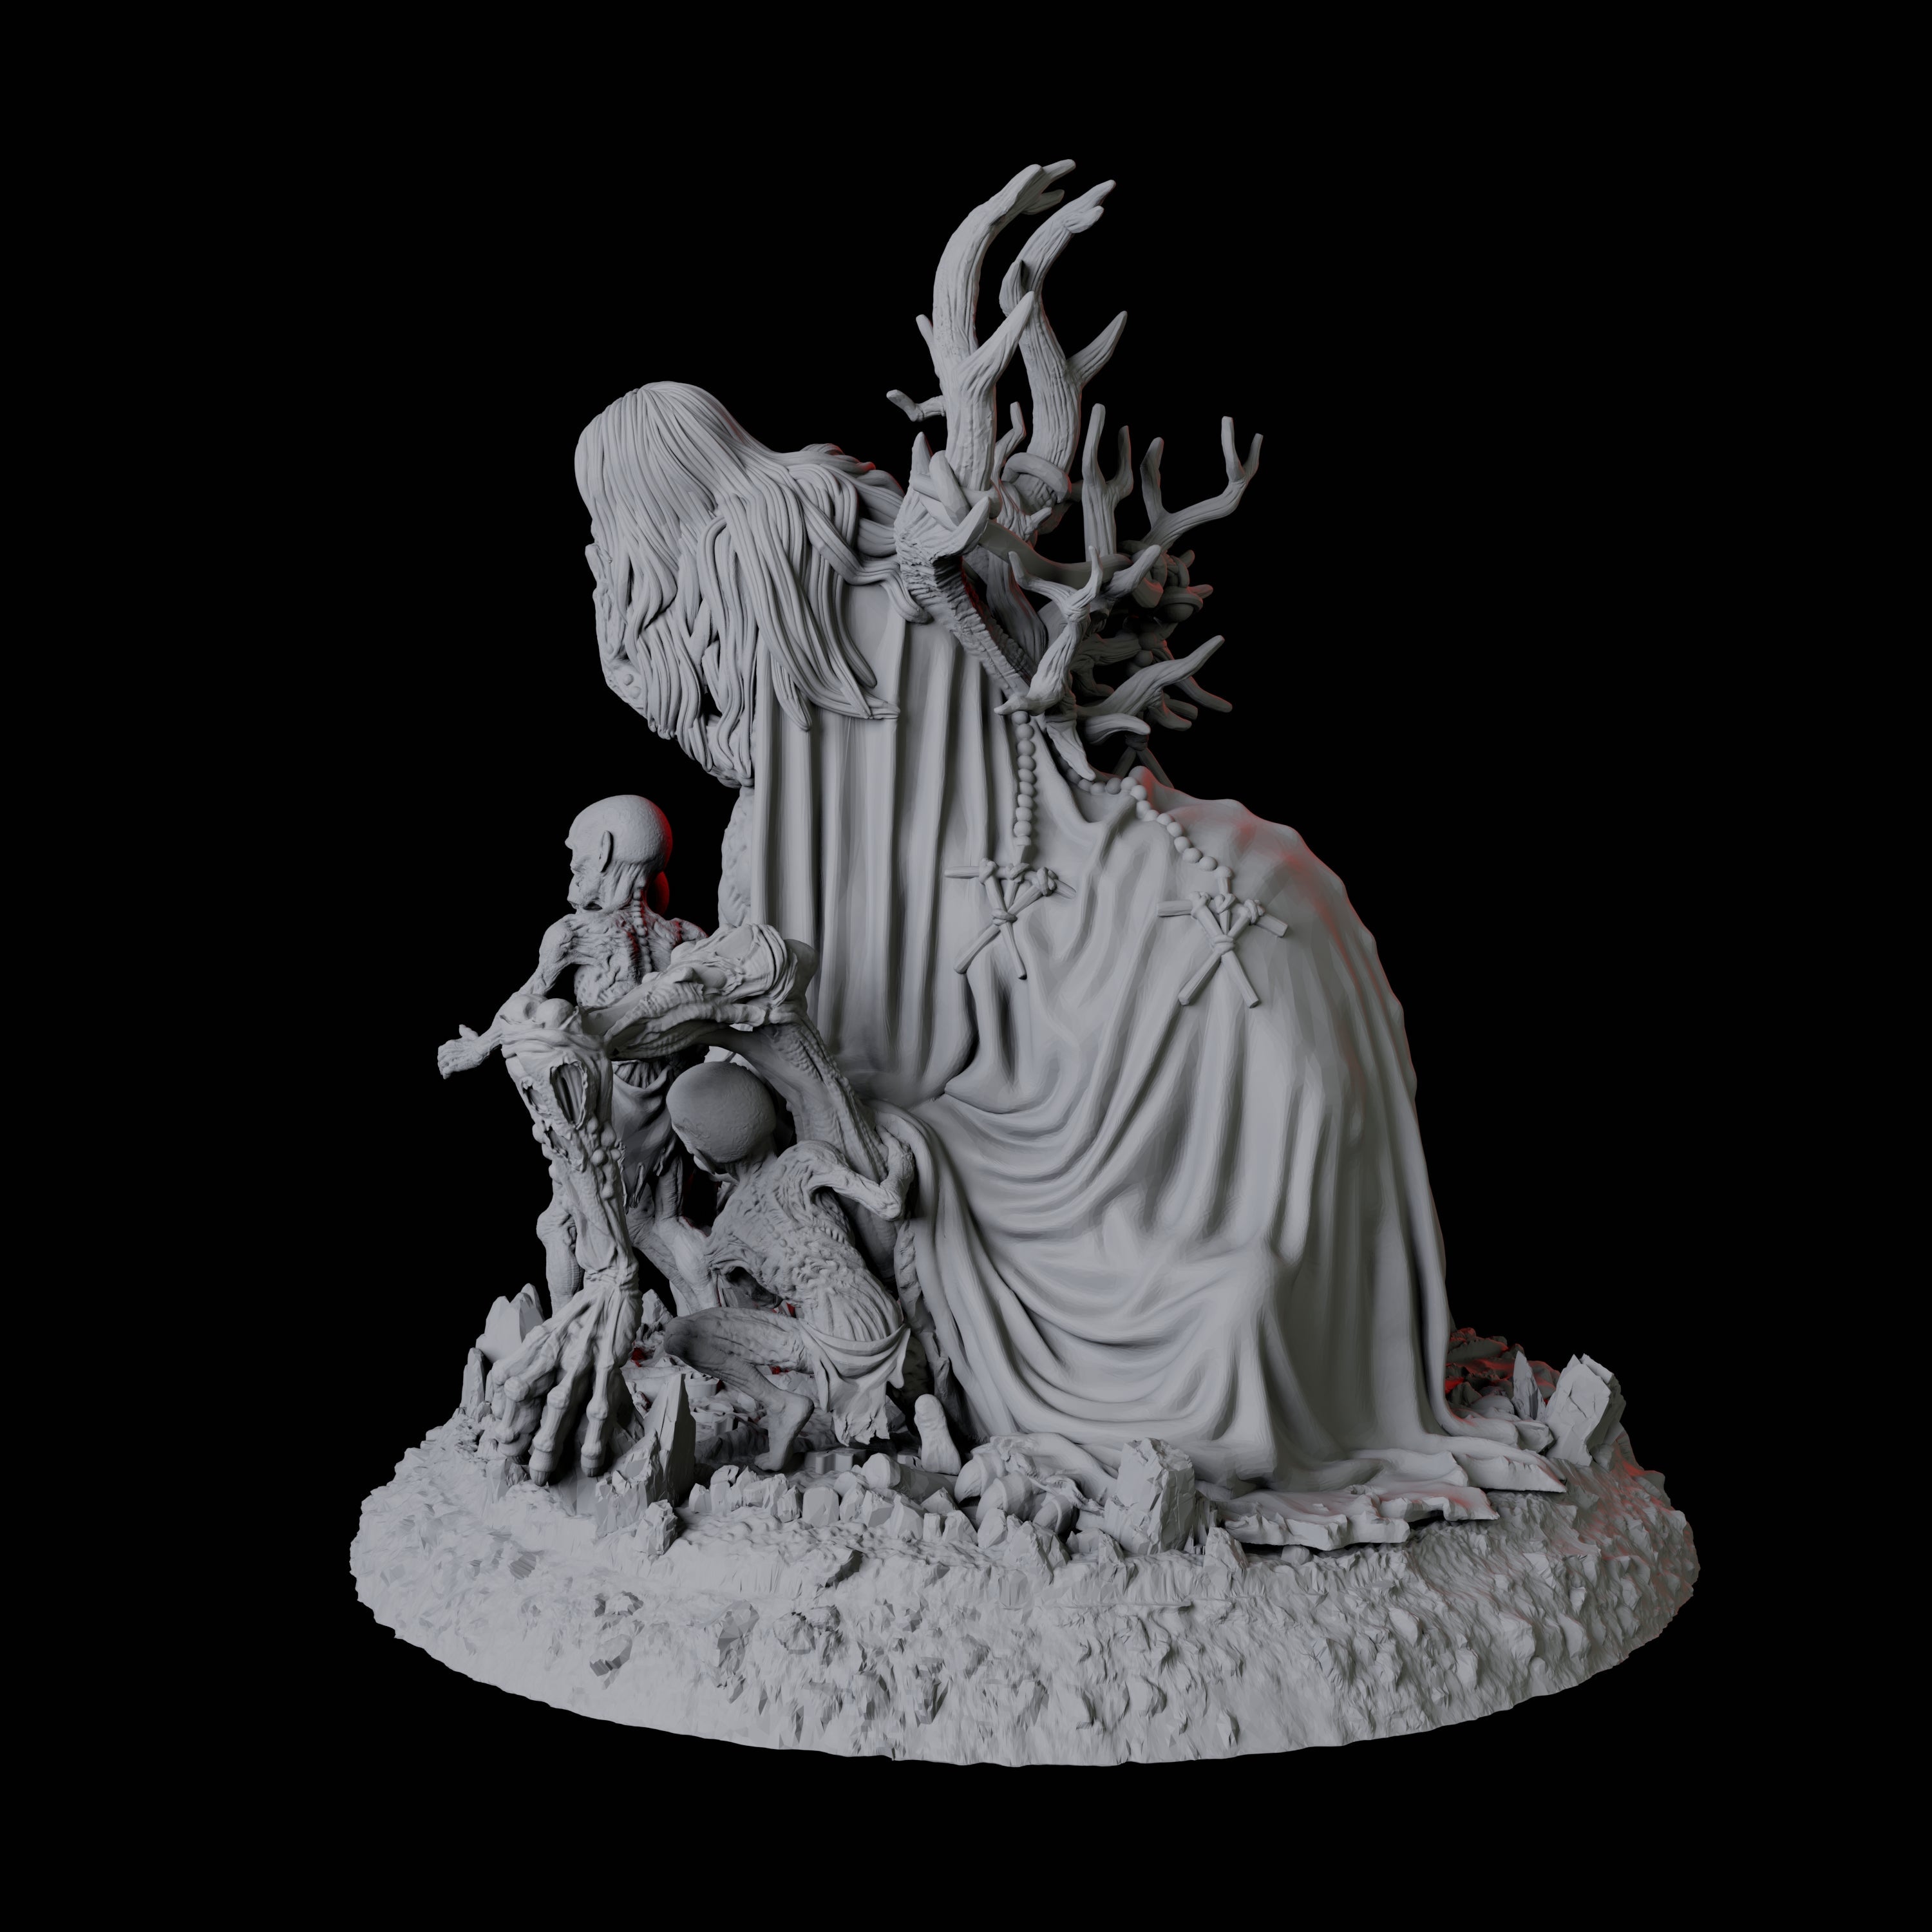 Malevolent Moon Hag Miniature for Dungeons and Dragons, Pathfinder or other TTRPGs